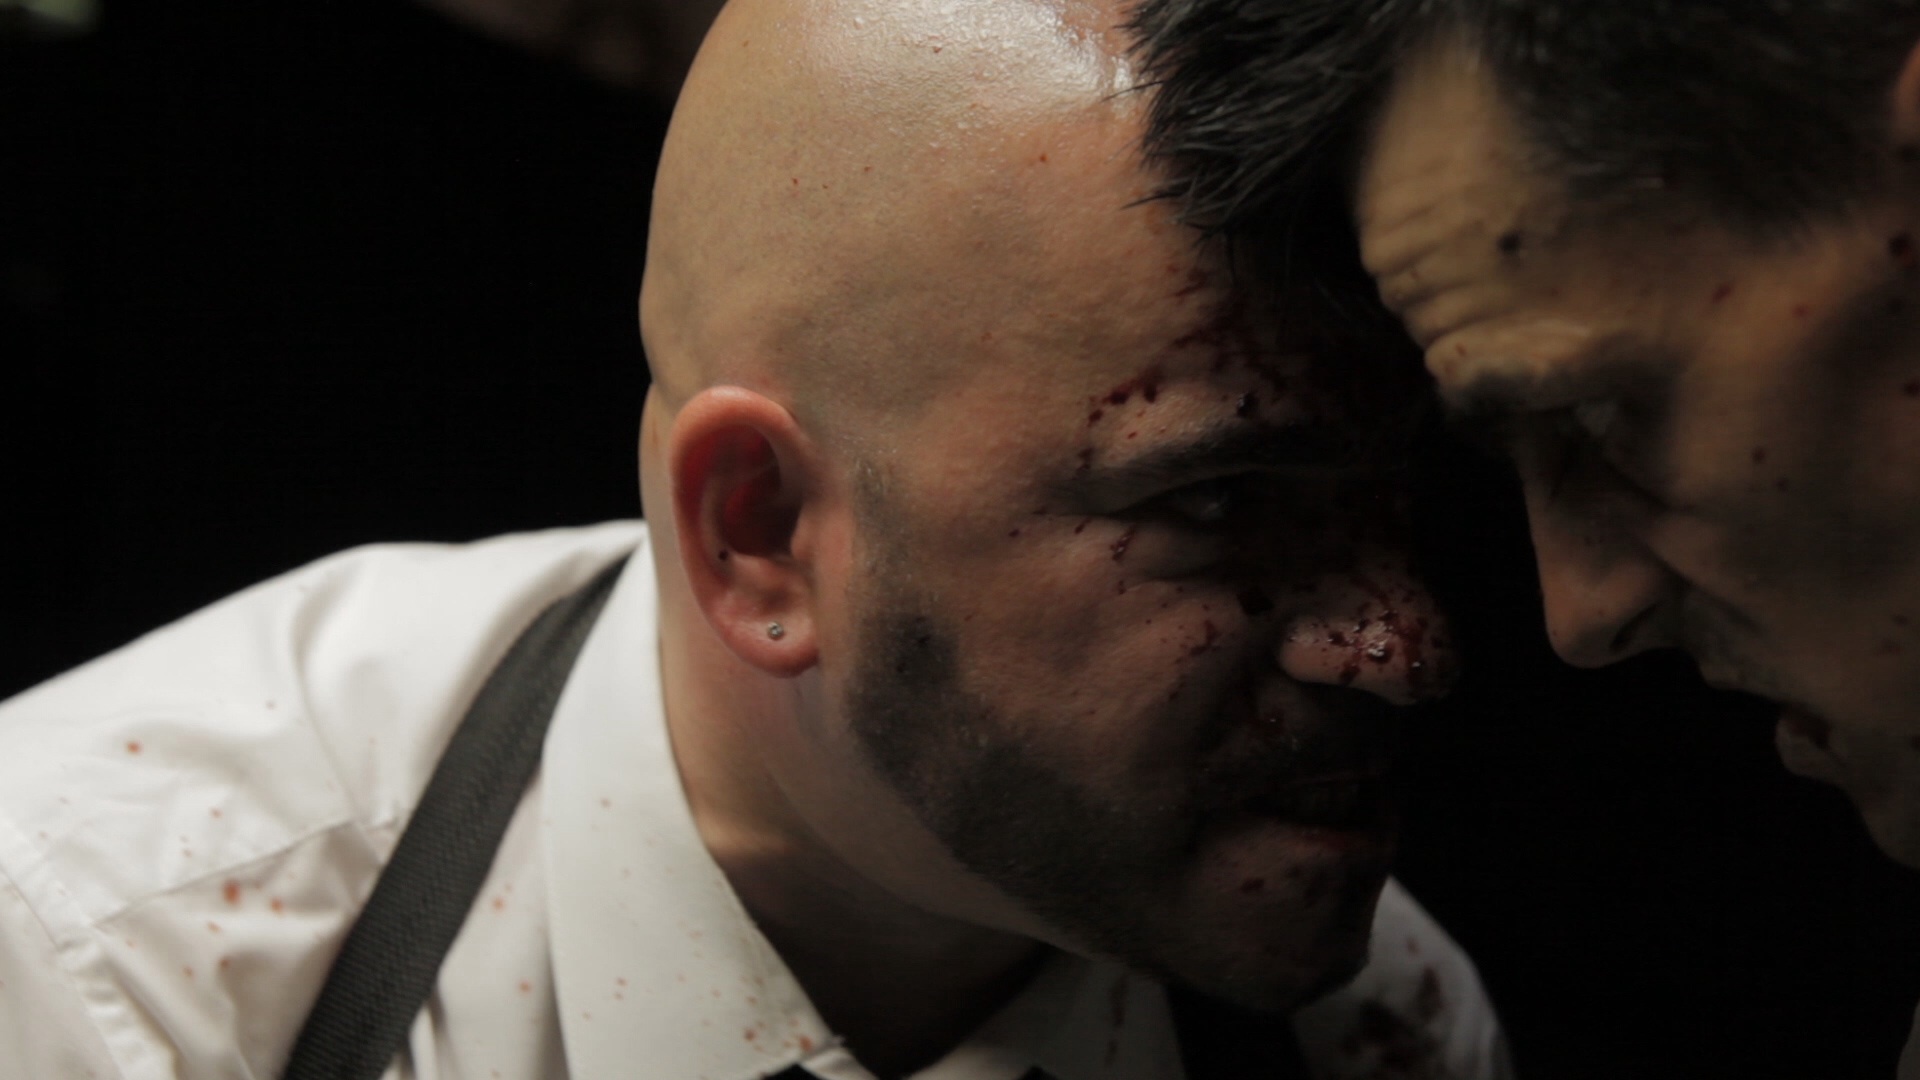 A gripping scene with co actor Marcus Langford